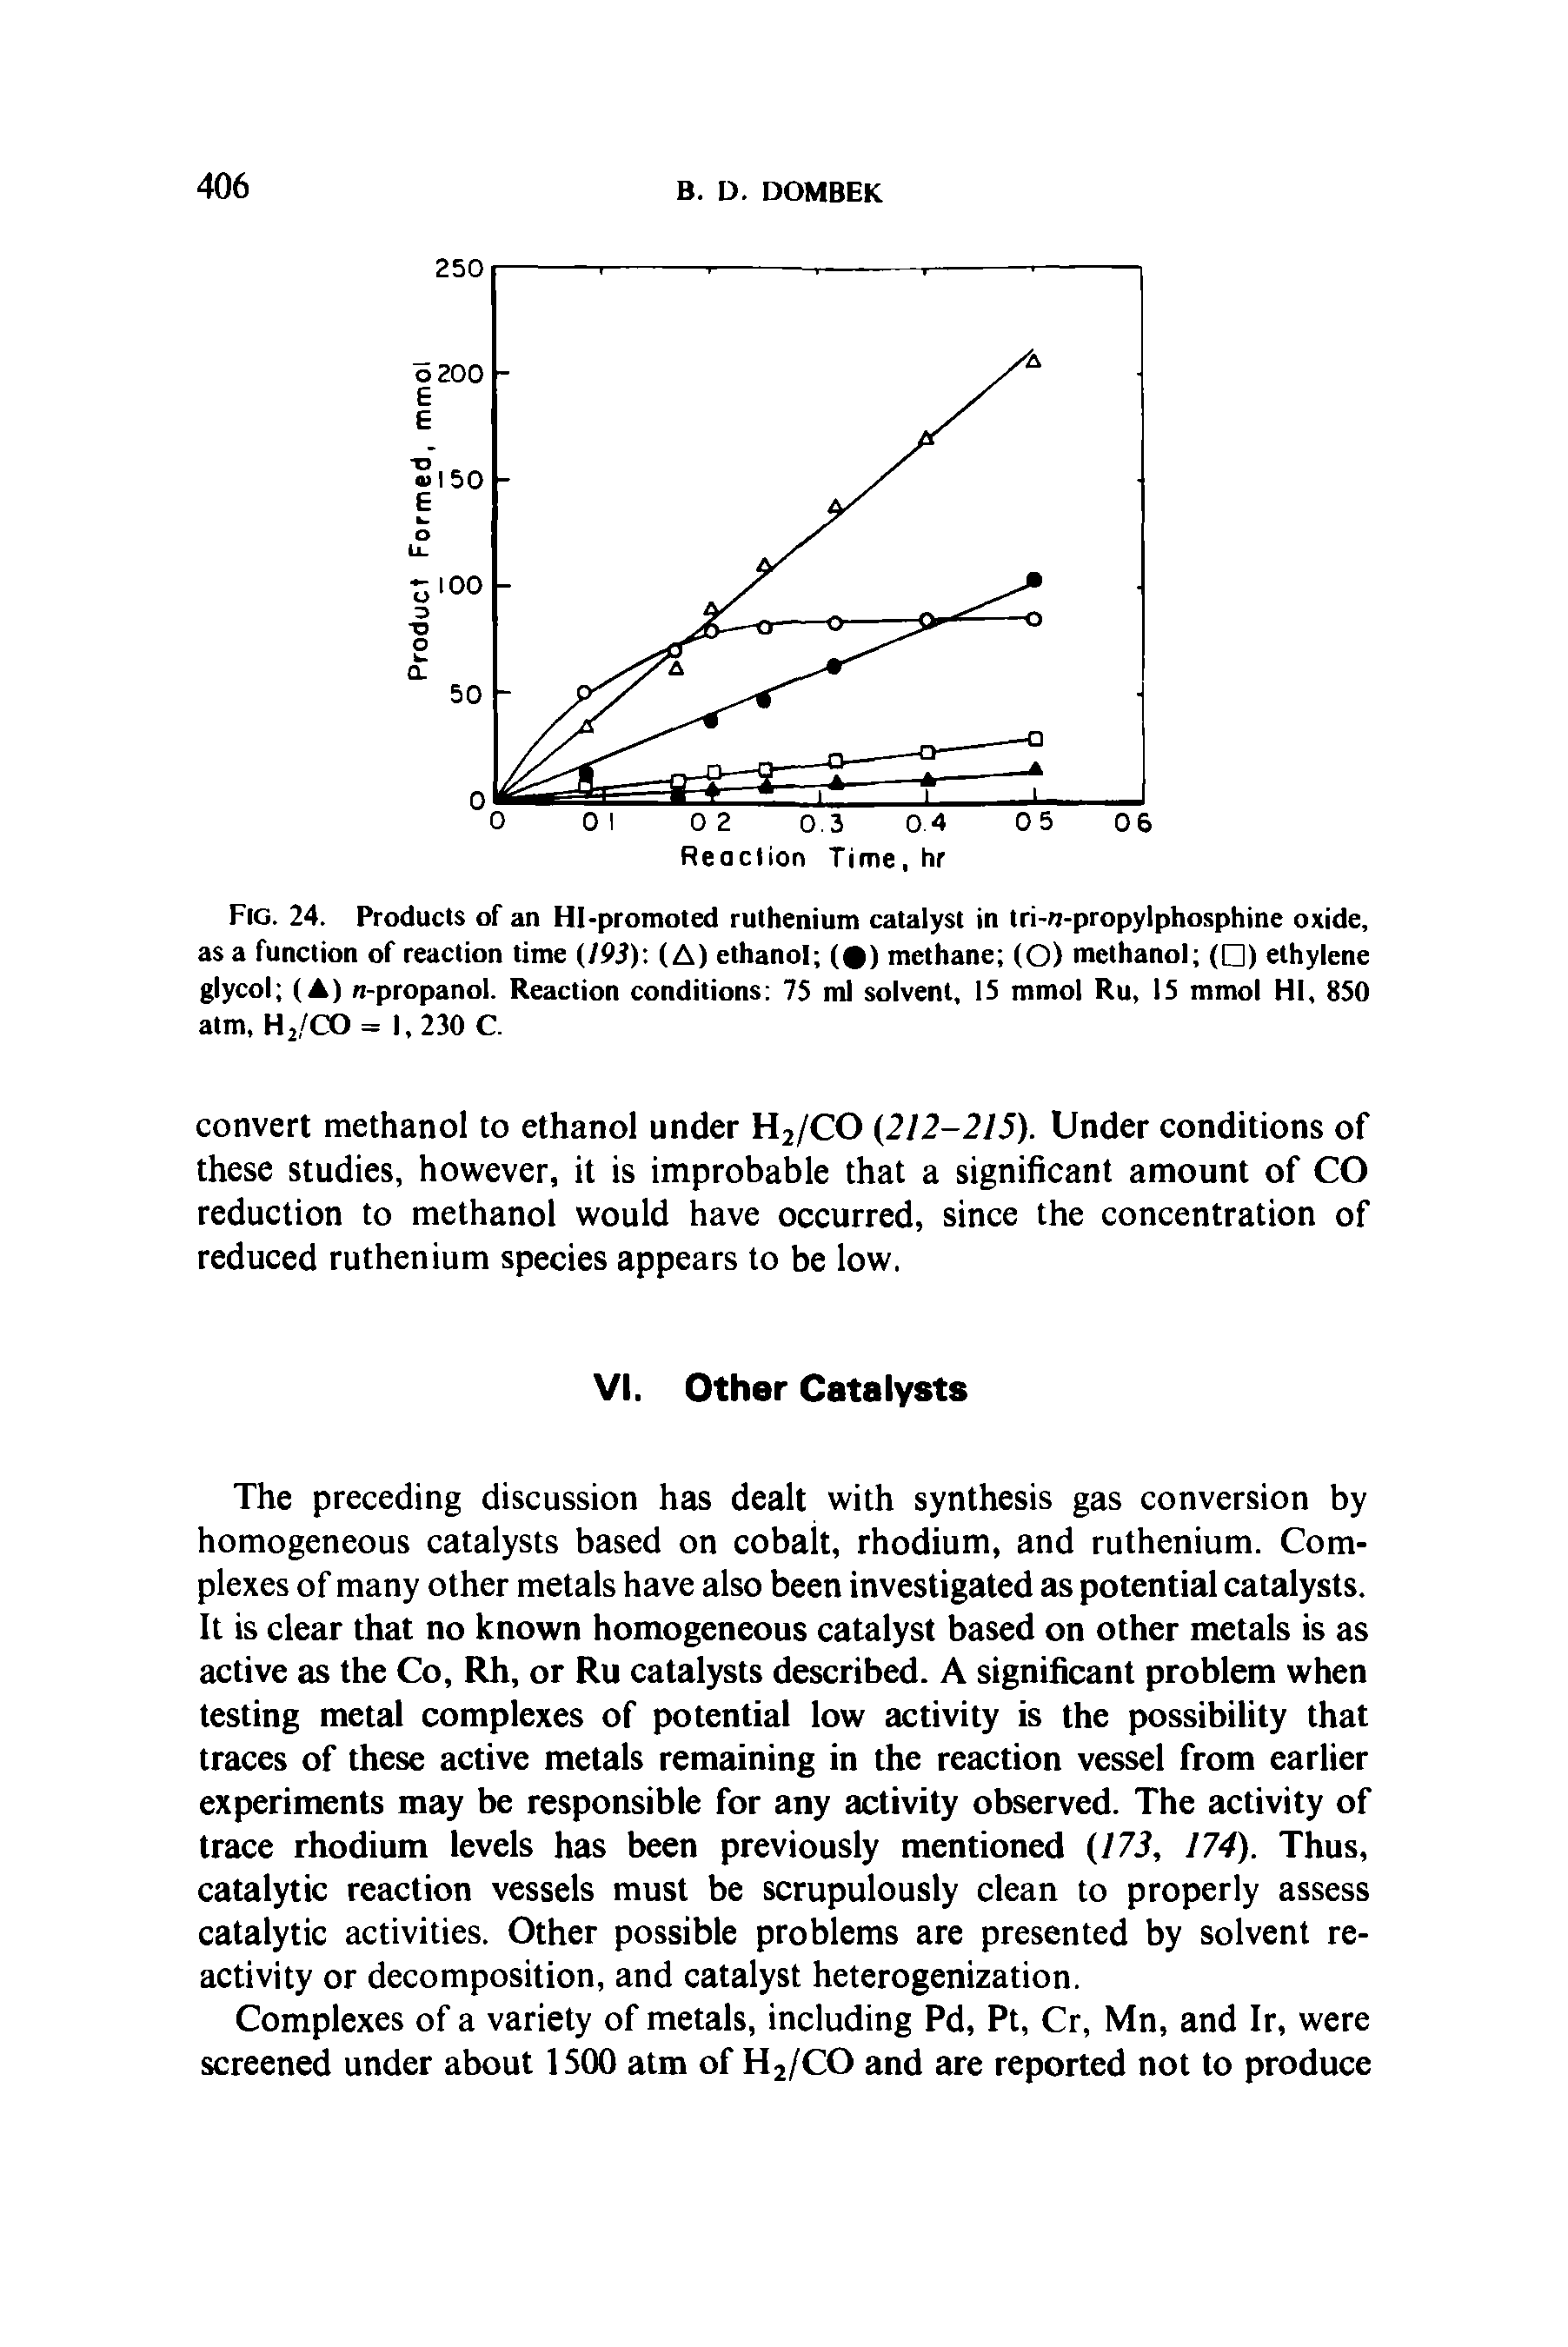 Fig. 24. Products of an Hi-promoted ruthenium catalyst in tri-n-propylphosphine oxide, as a function of reaction time (193) (A) ethanol ( ) methane (O) methanol ( ) ethylene glycol (A) n-propanol. Reaction conditions 75 ml solvent, 15 mmol Ru, 15 mmol HI, 850 atm, H2/CO = 1,230 C.